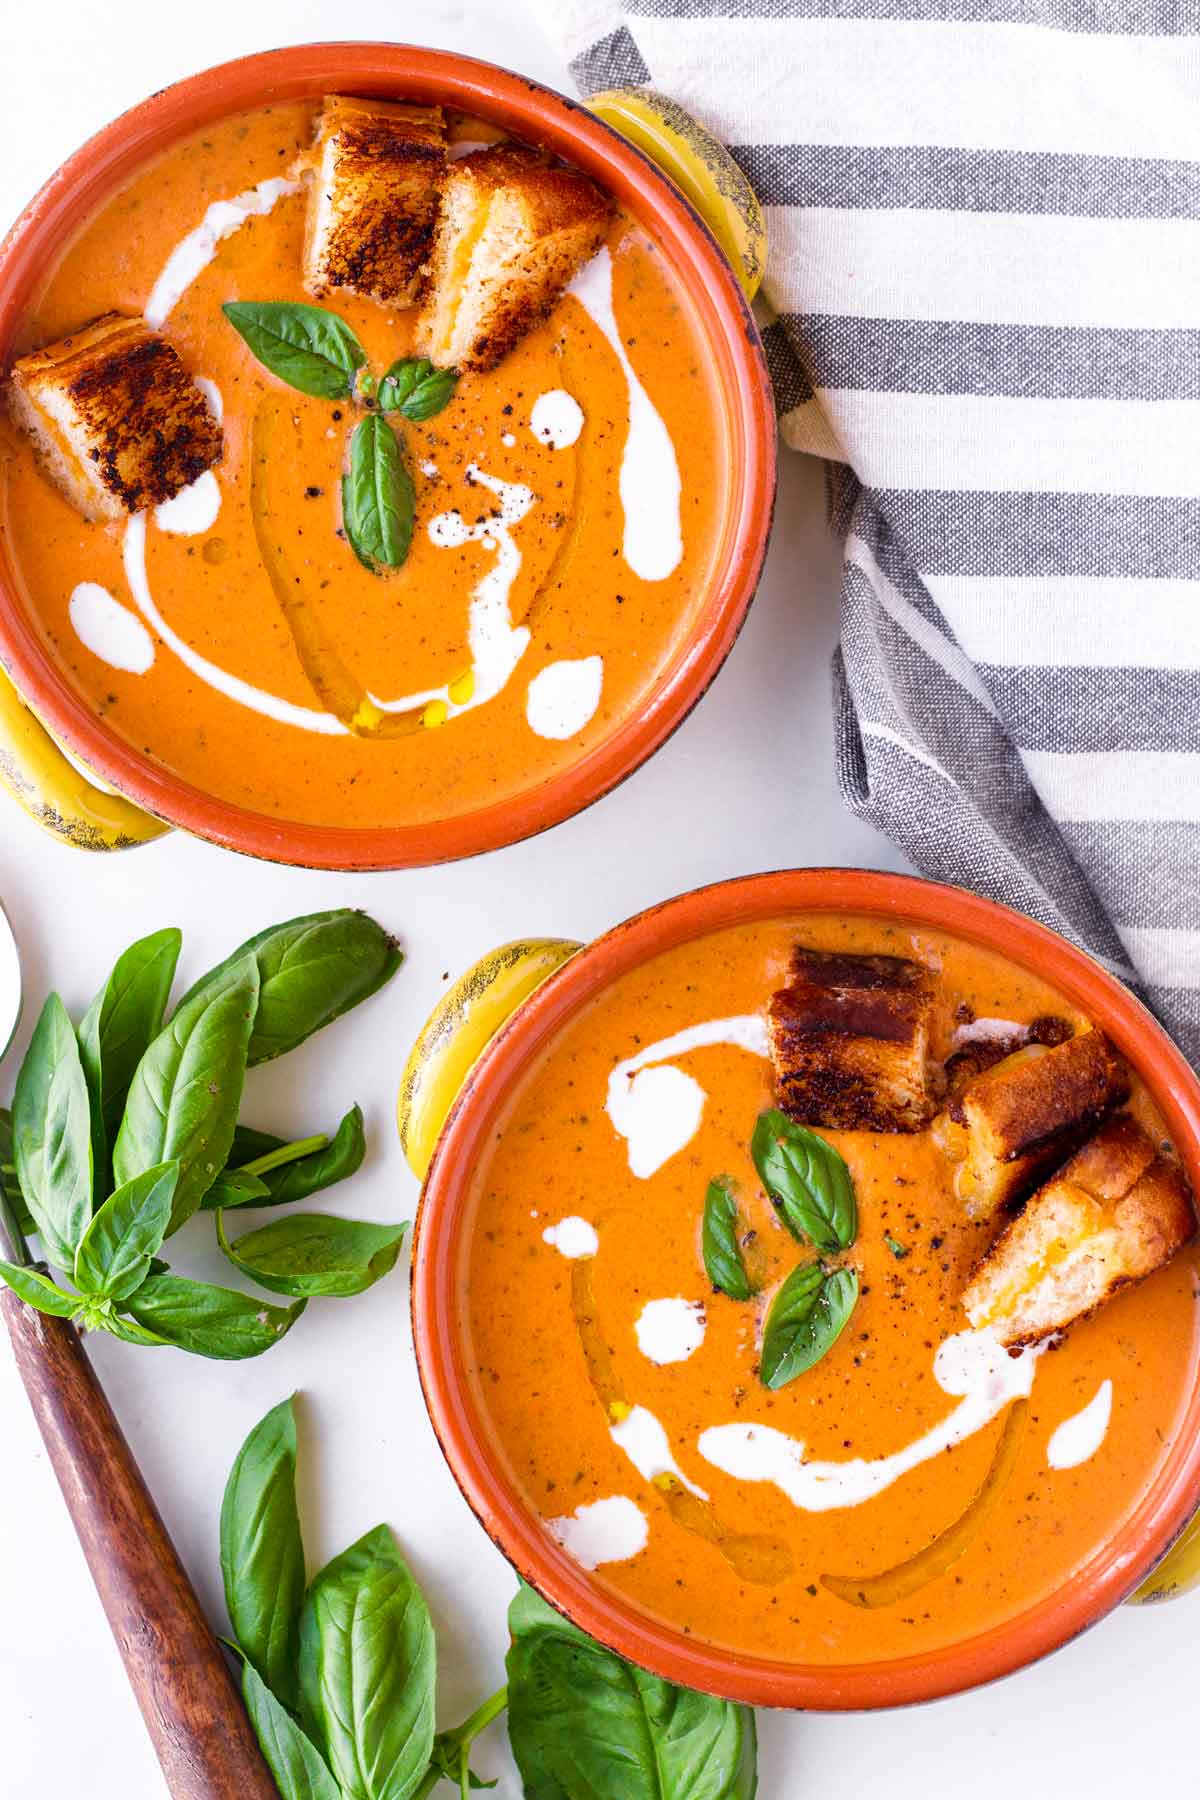 two bowls of tomato basil bisque with garnish